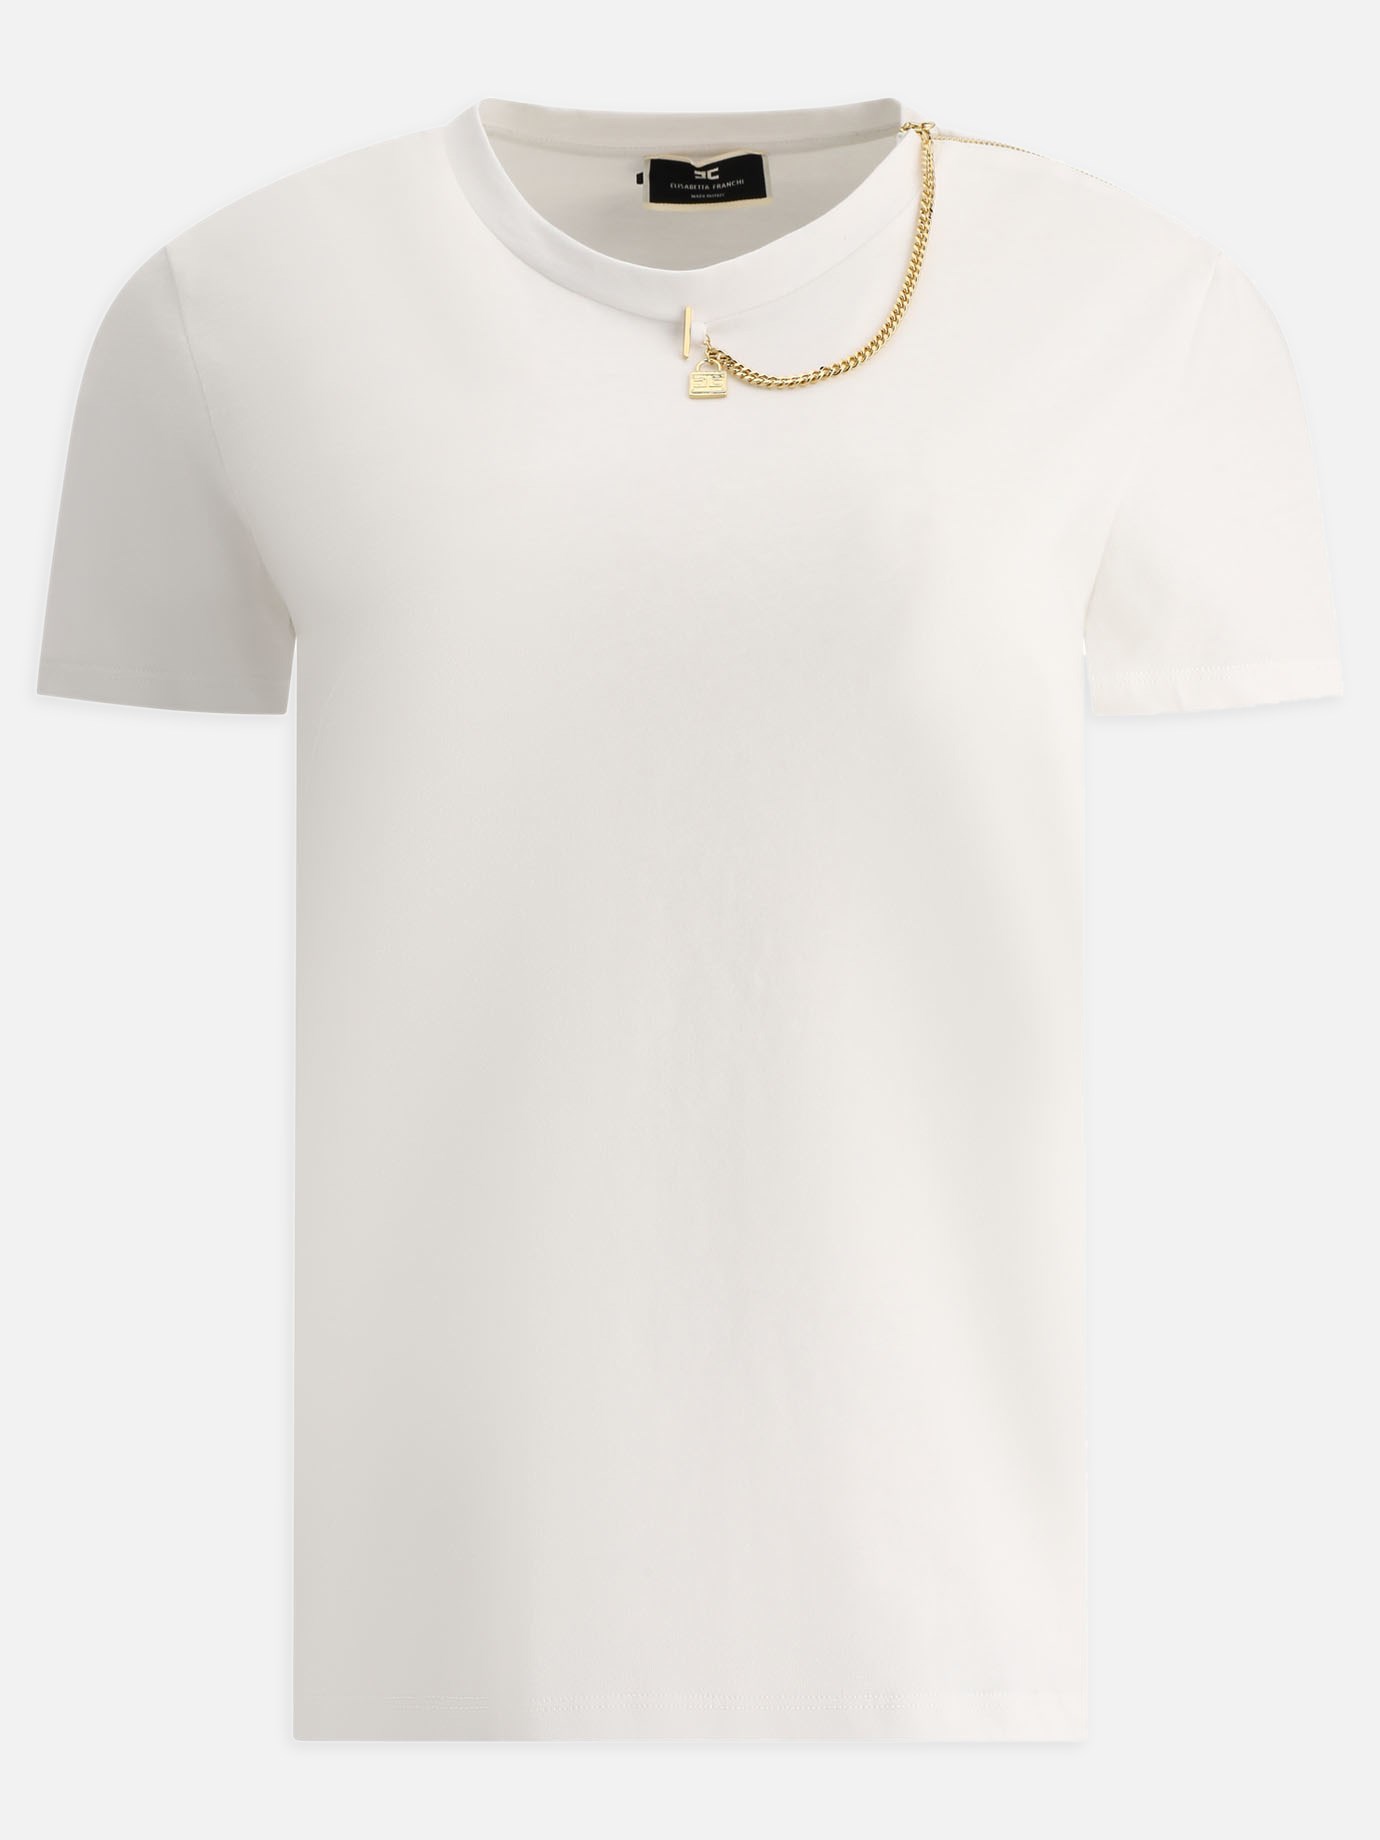 T-shirt with chain